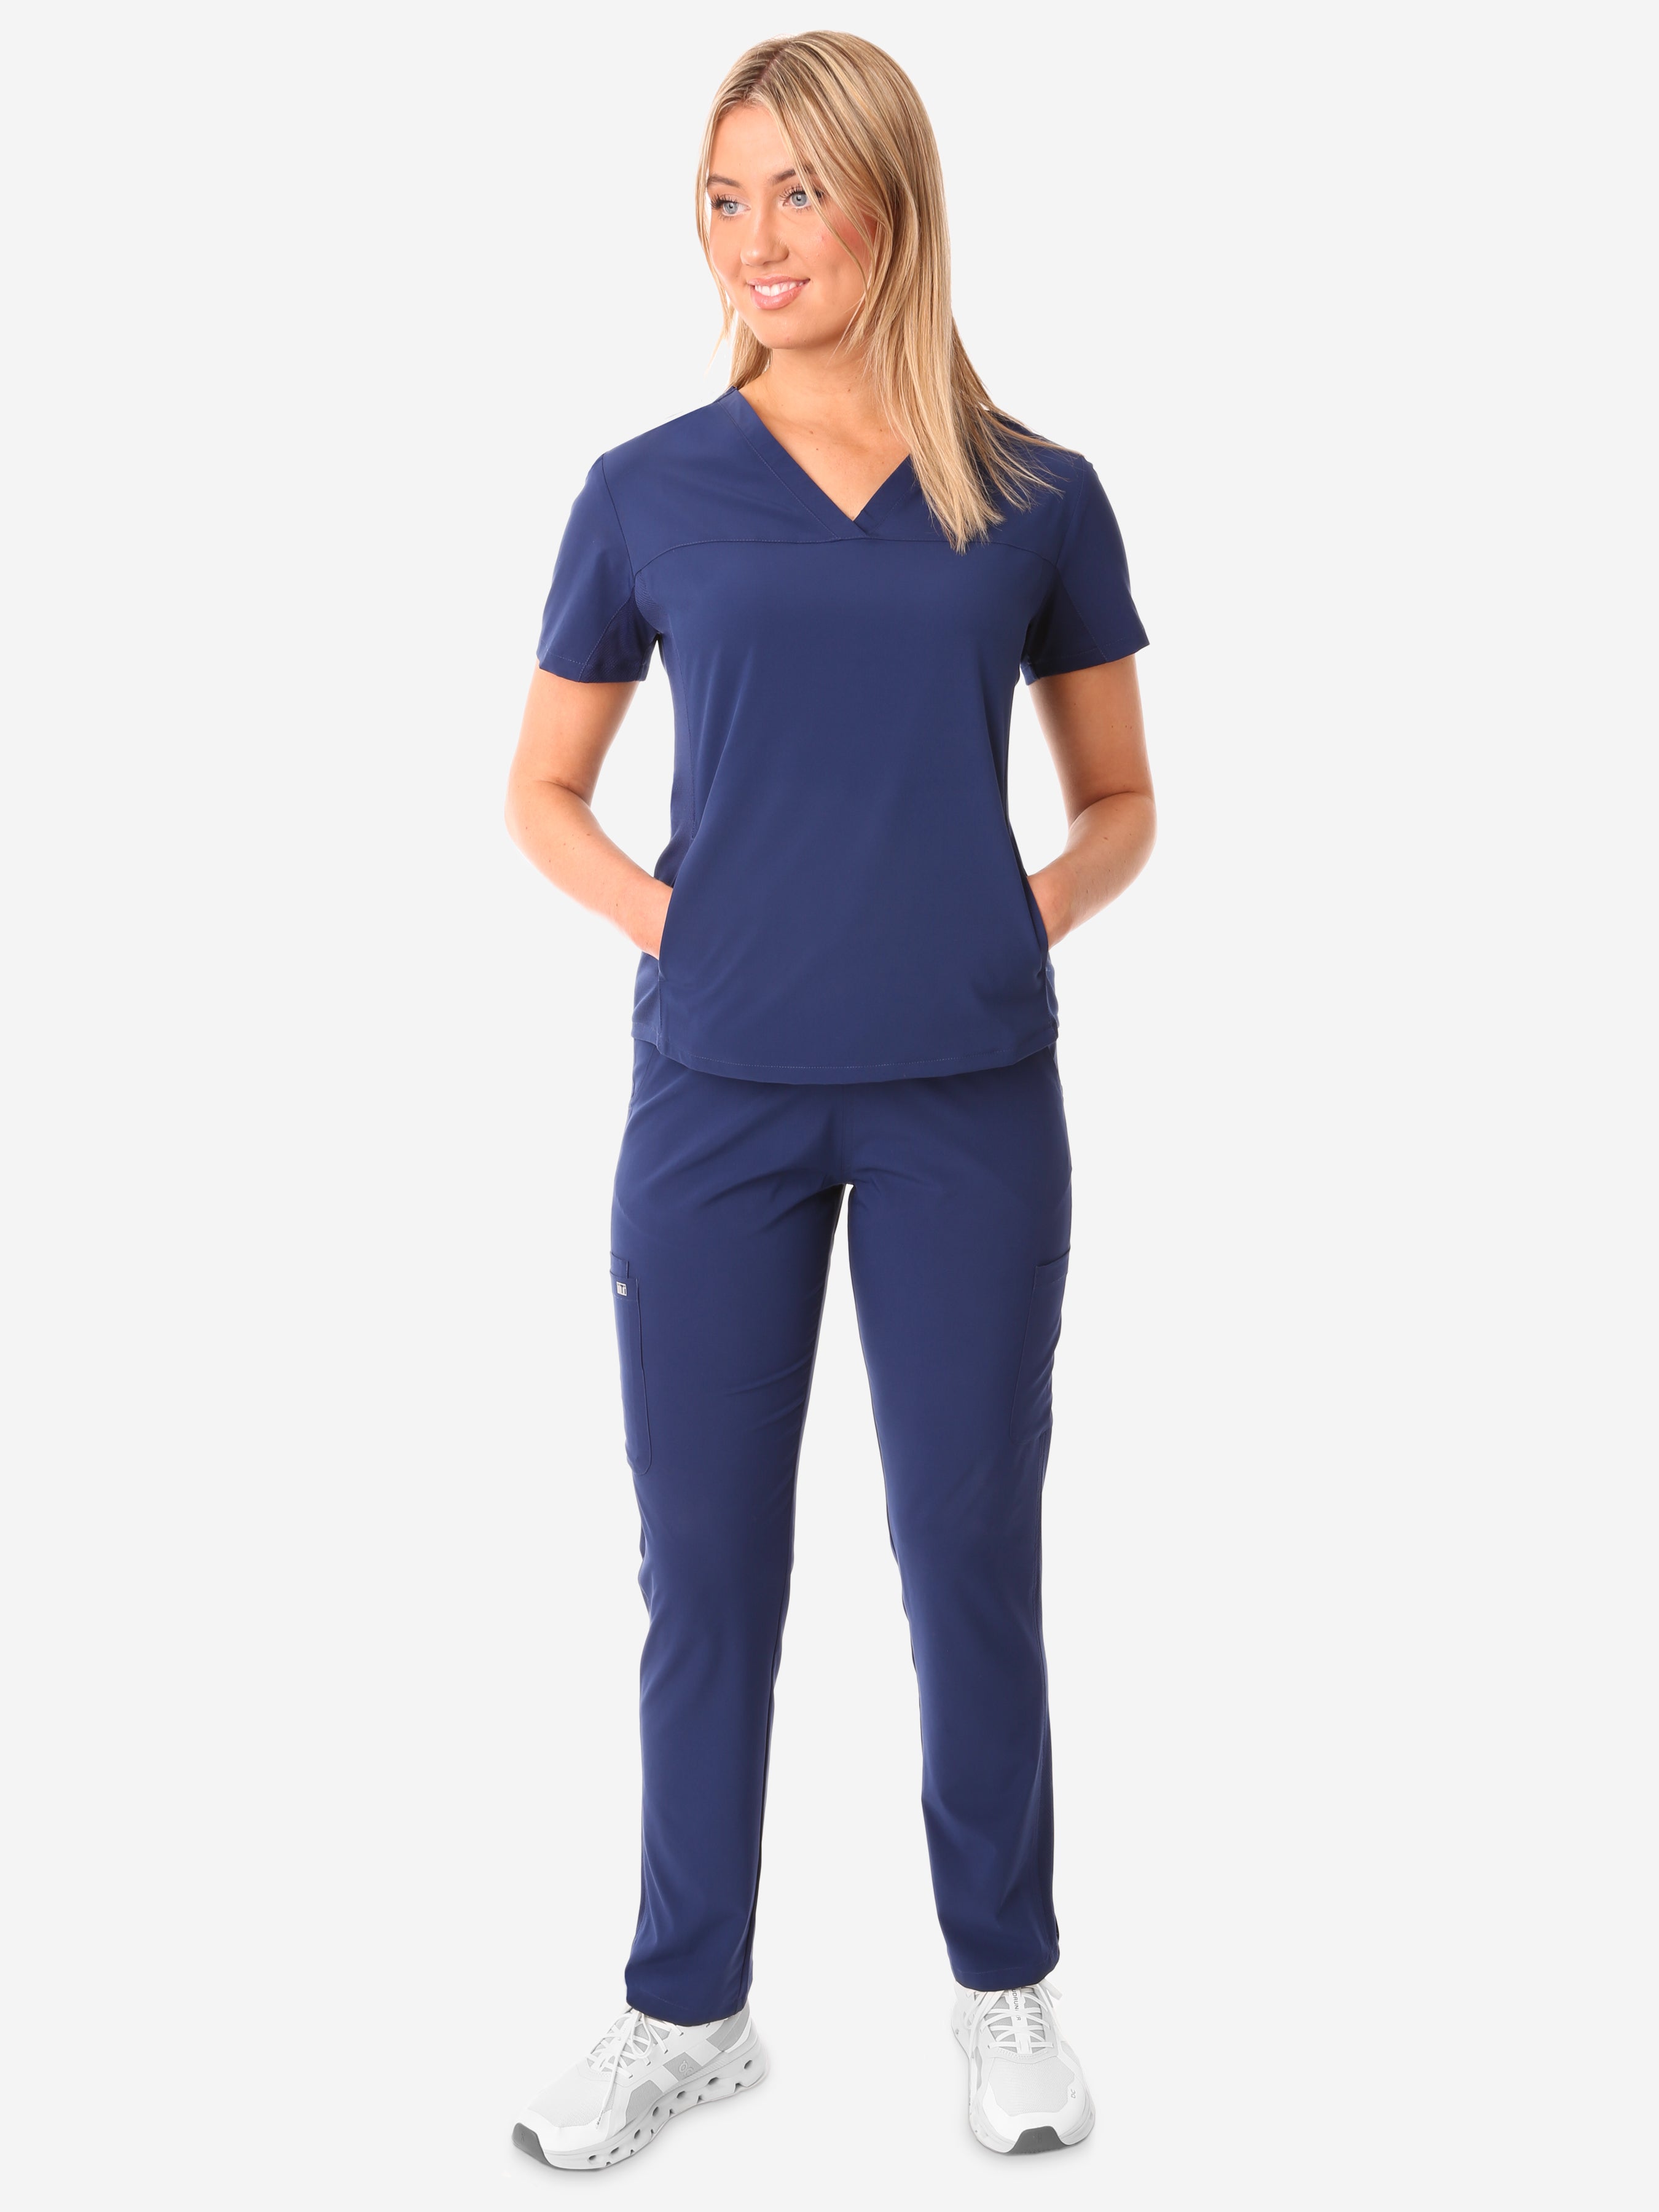 TiScrubs Navy Women&#39;s Stretch 9-Pocket Pants and Stash-Pocket  Top Front View Full Body